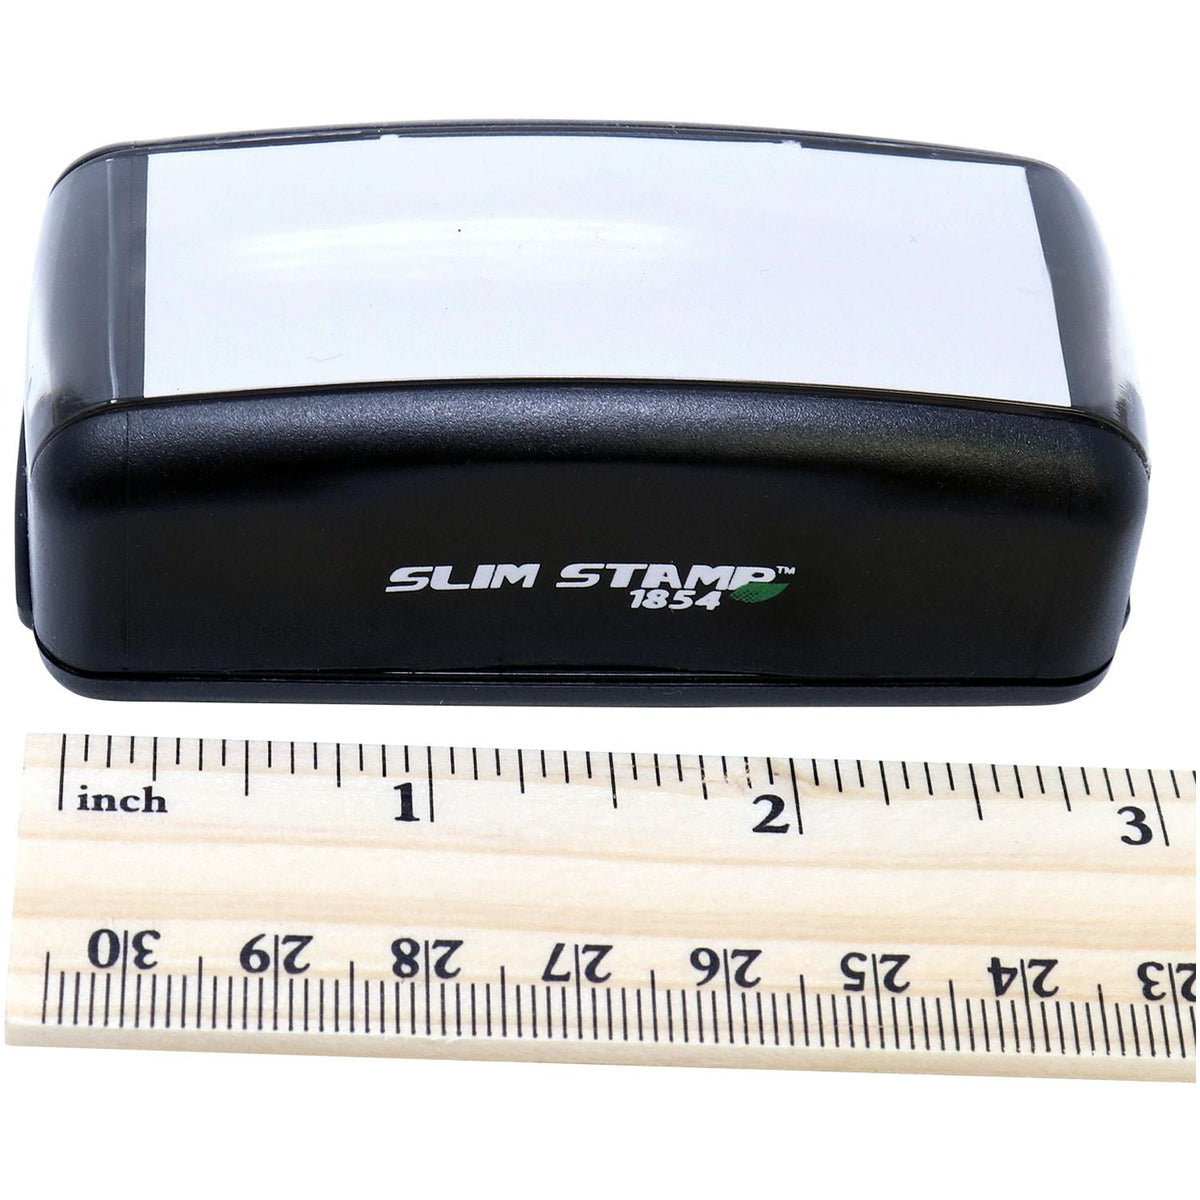 Measurement Large Pre Inked Attorney Client Privilege Stamp with Ruler